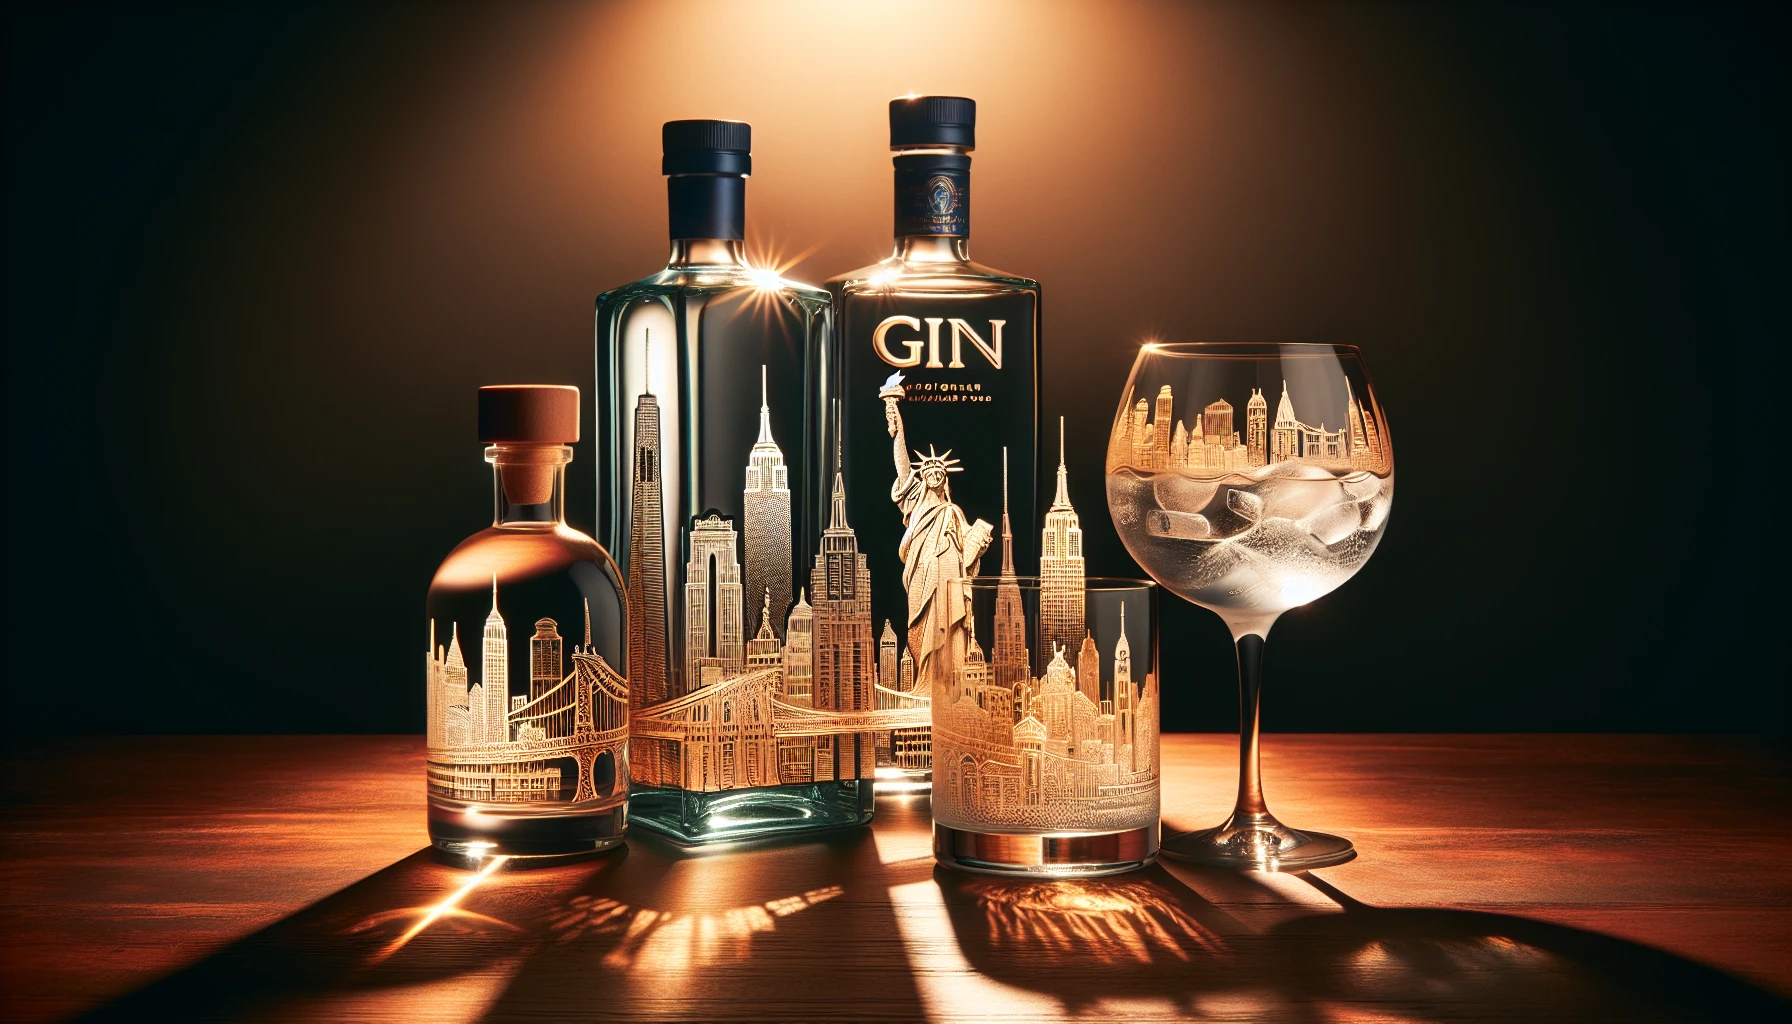 The best Gin in New York City that I don’t endorse